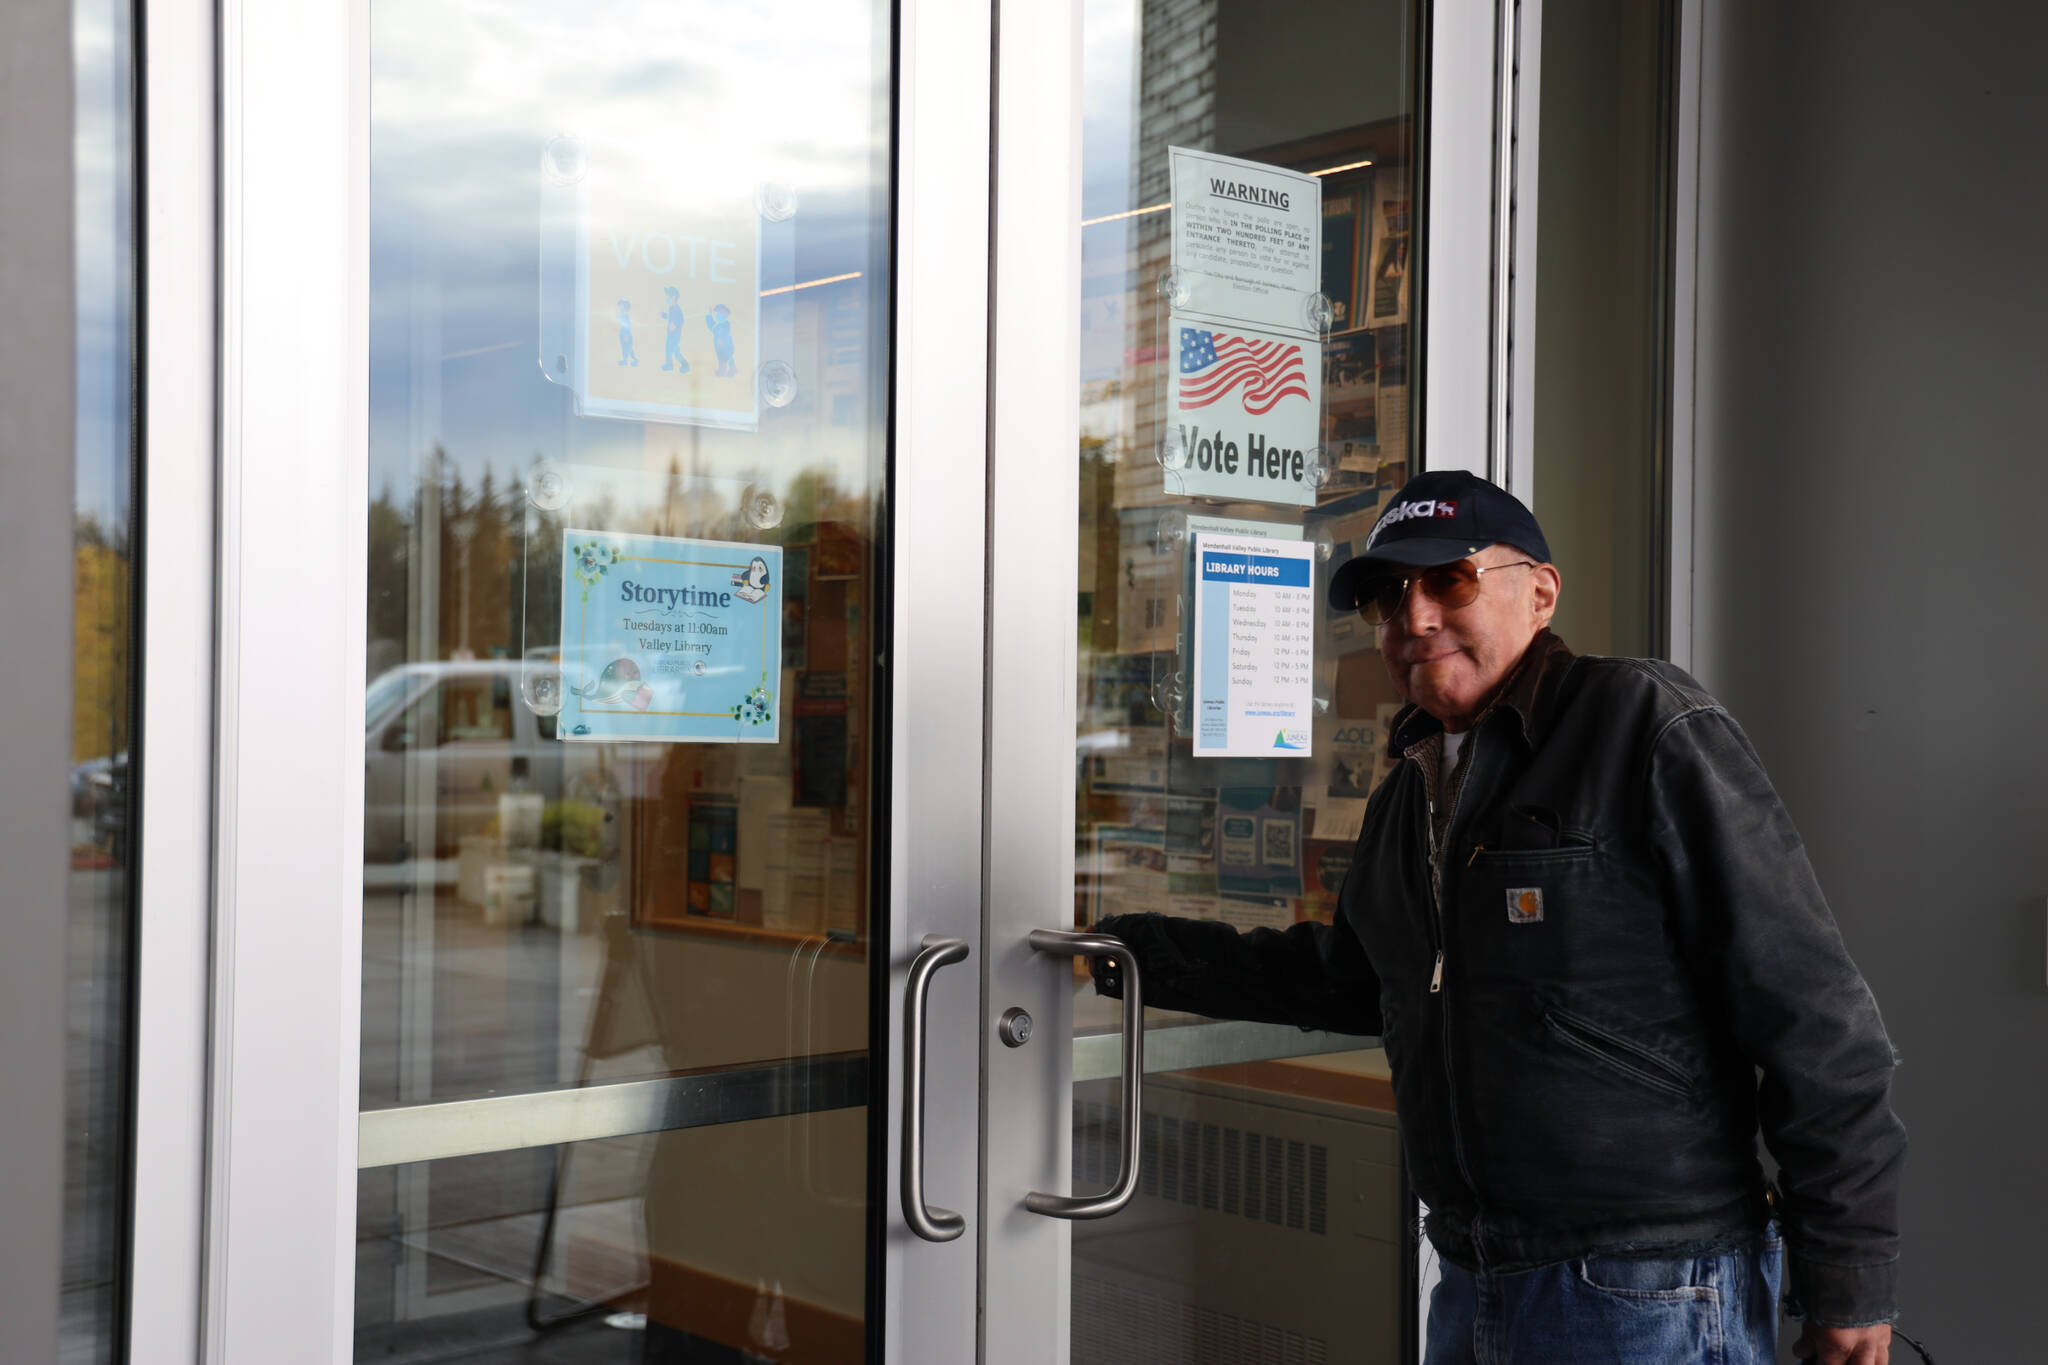 Larry Silverly opens the door at the voter center located at the Mendenhall Valley Public Library to cast his vote on Tuesday afternoon. (Clarise Larson / Juneau Empire)